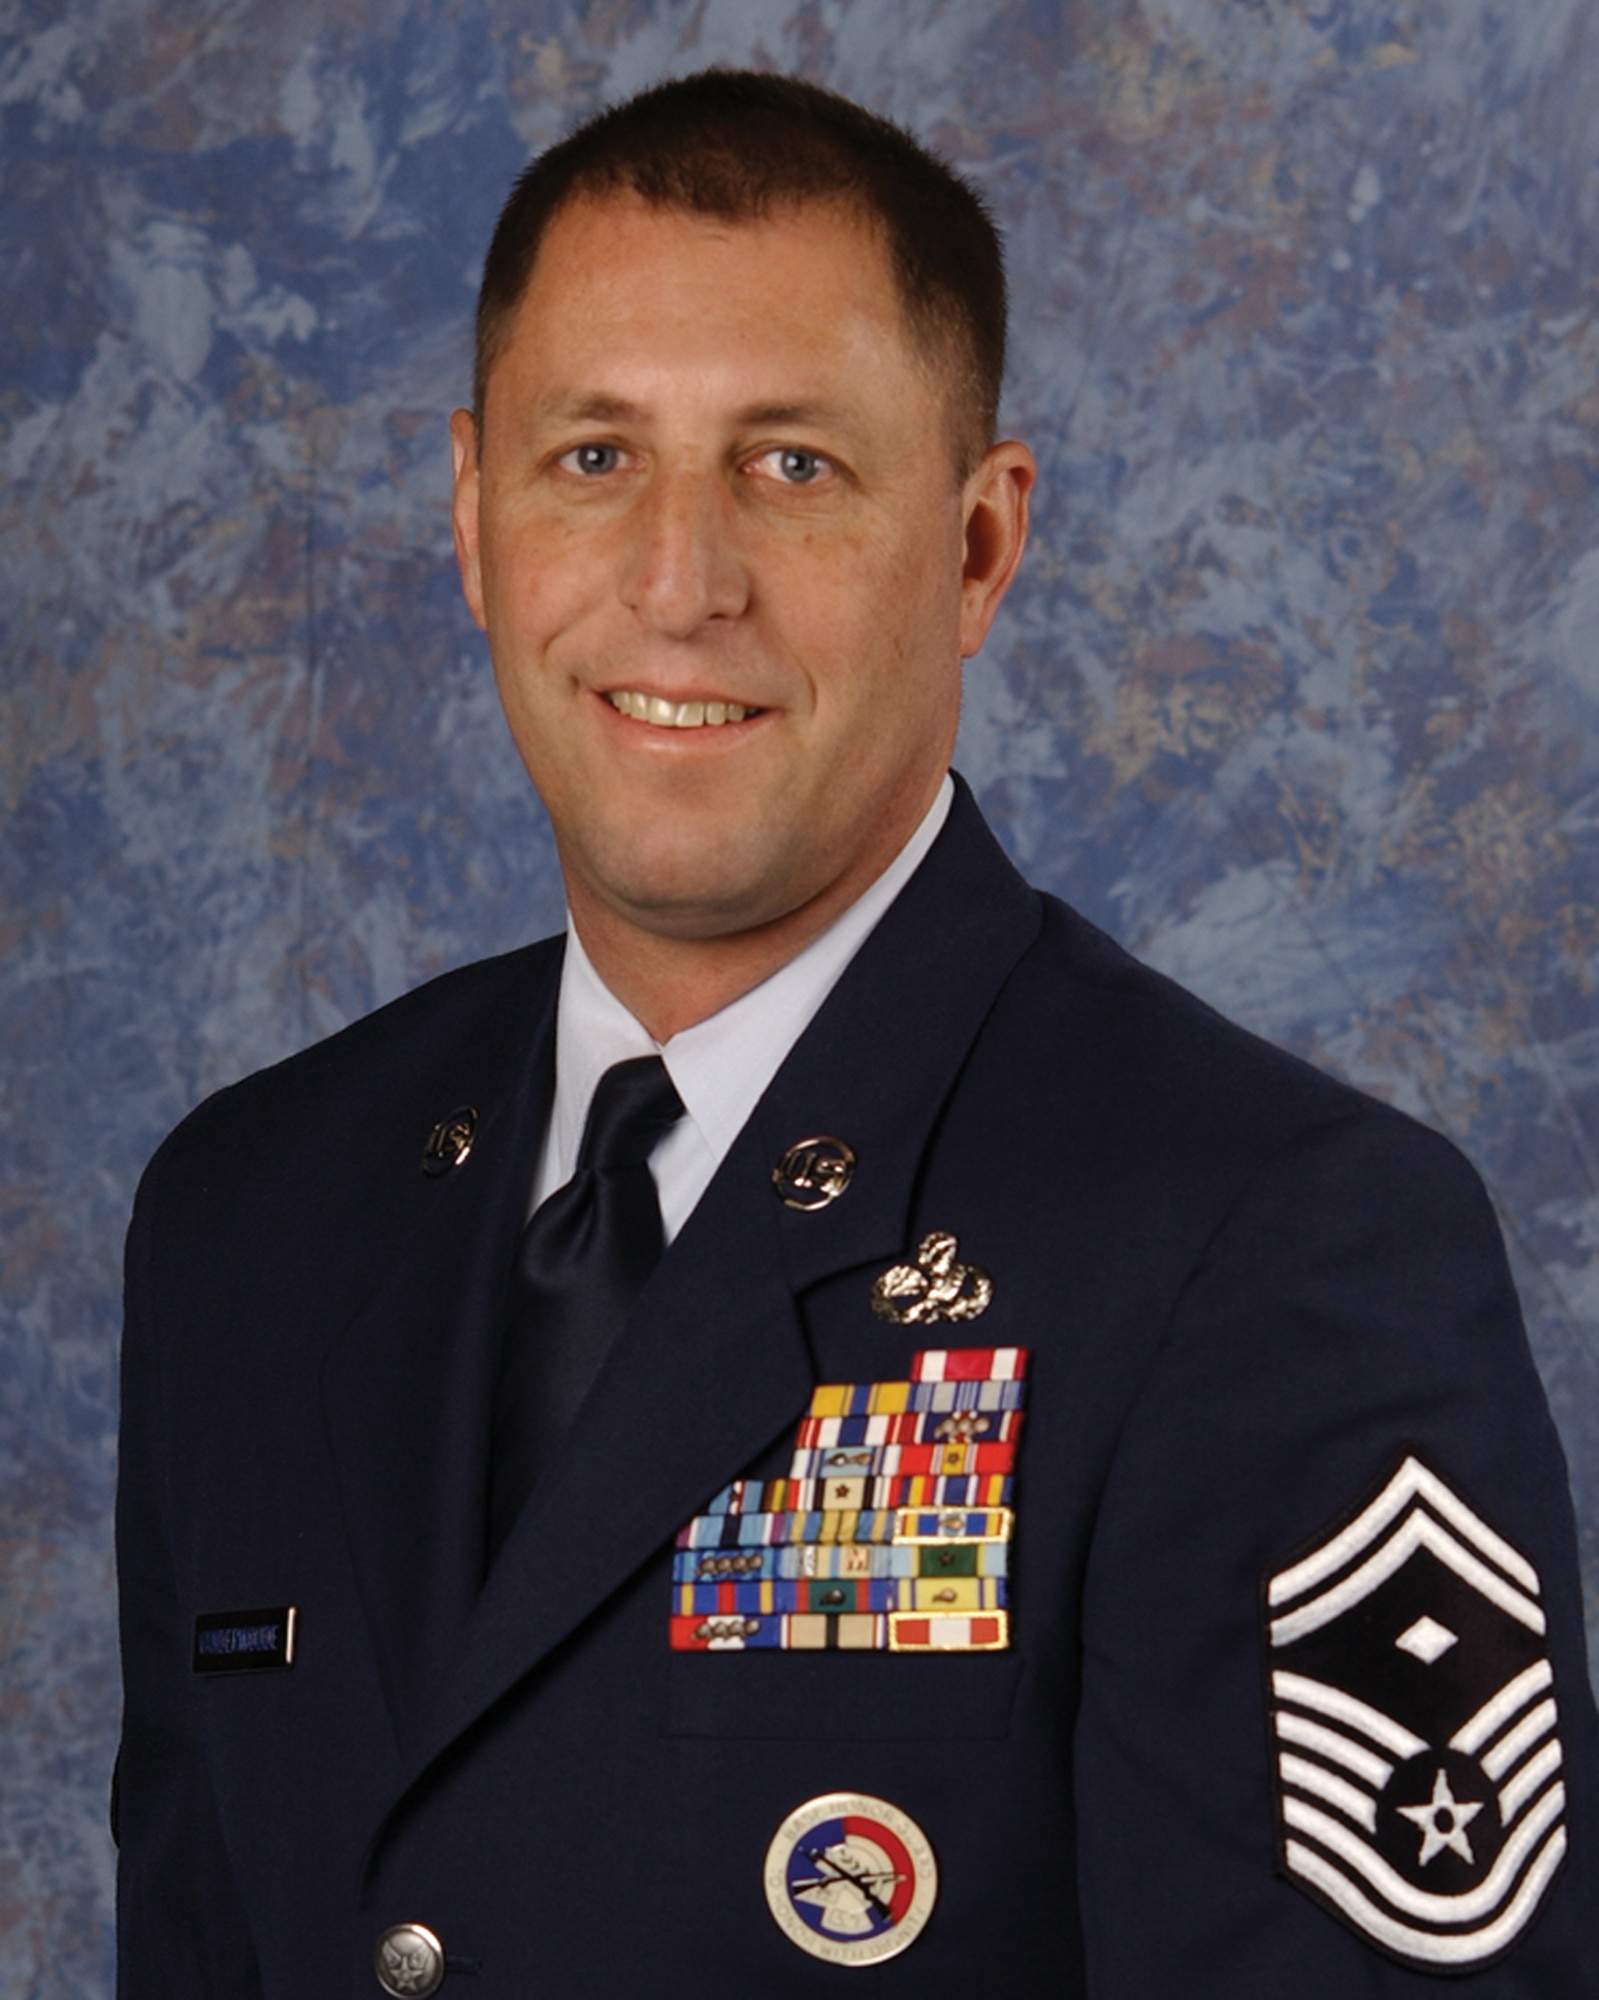 Senior Master Sgt. Jeffery C. Vander Woude is the First Sergeant for the 114th Maintenance Squadron and 114th Maintenance Operations Flight. Vander Woude resides in Sioux Falls.